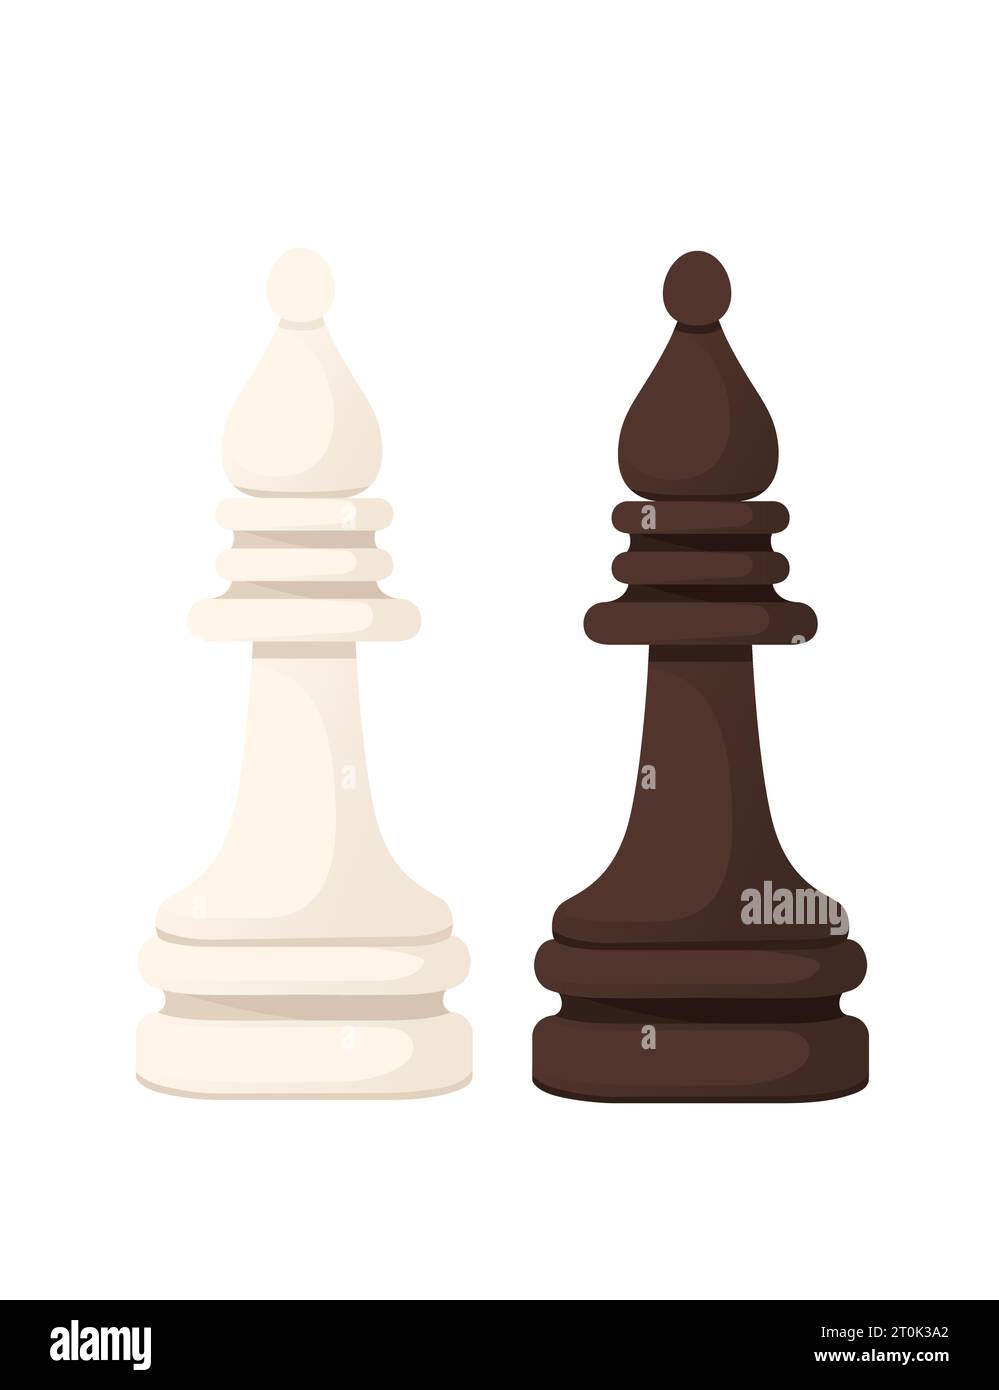 Photo chess pieces Stock Vector Images - Alamy